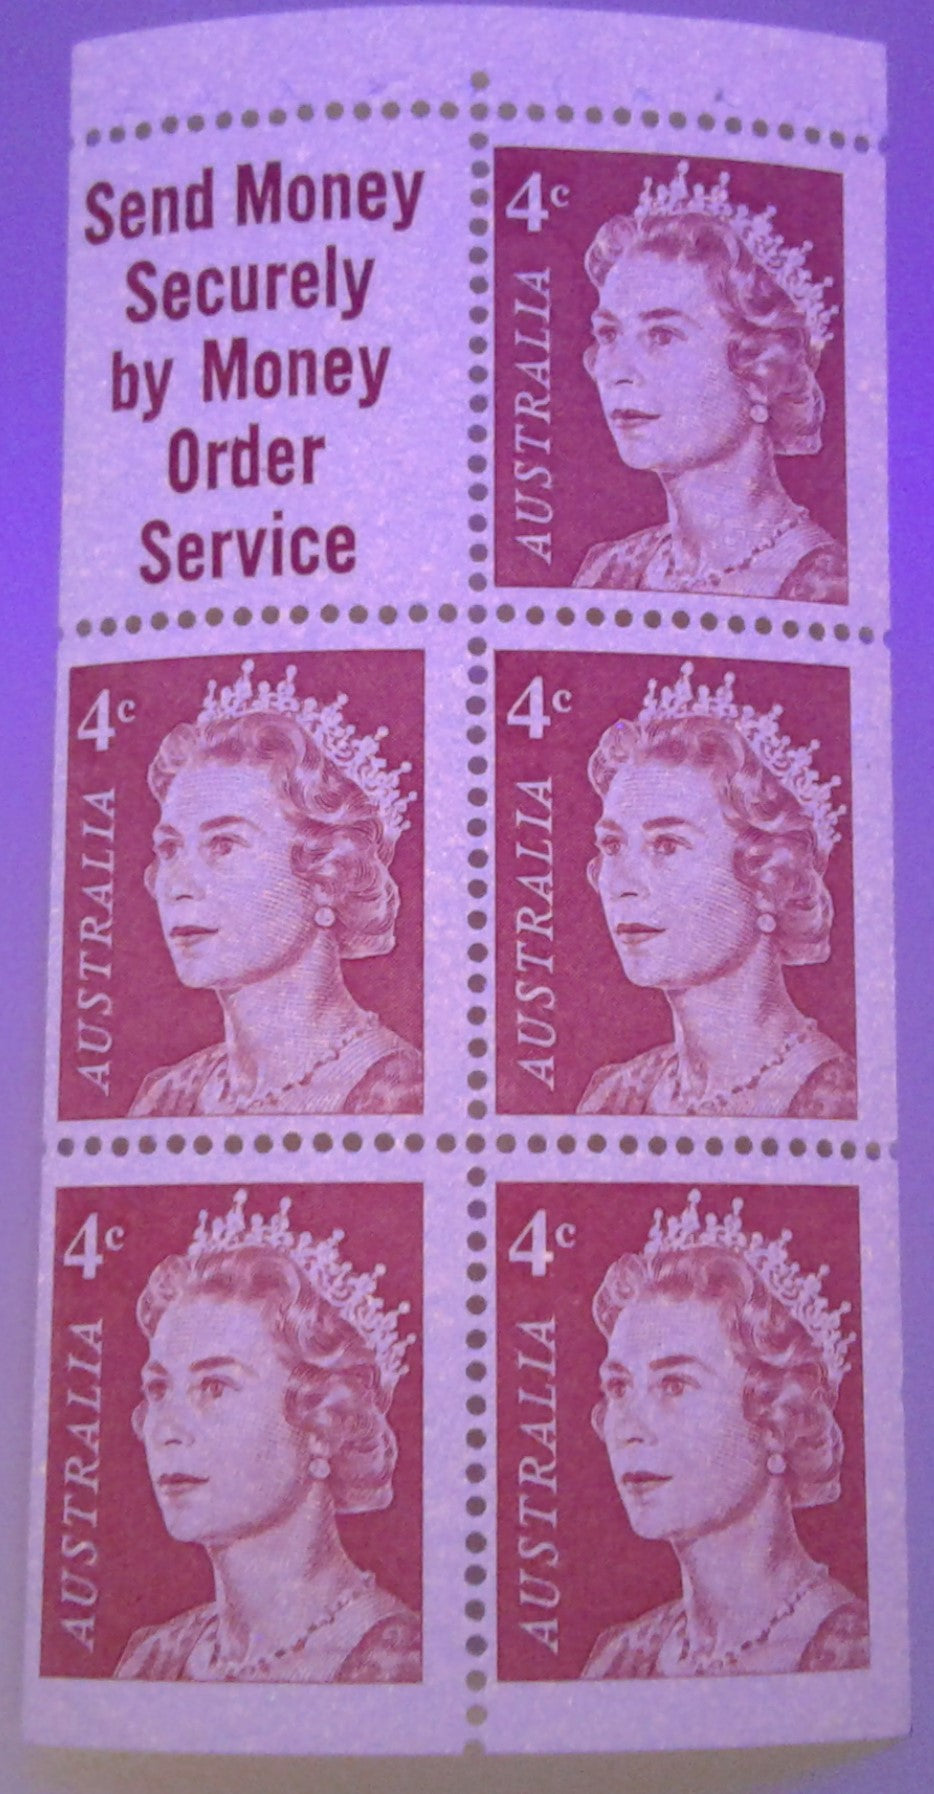 Australia #397a (SG#385a) 4c Orange Red Queen Elizabeth II 1966-1973 Decimal Definitive Issue, a Fine NH Booklet Pane of 5 + Label, Printed on Helecon Paper